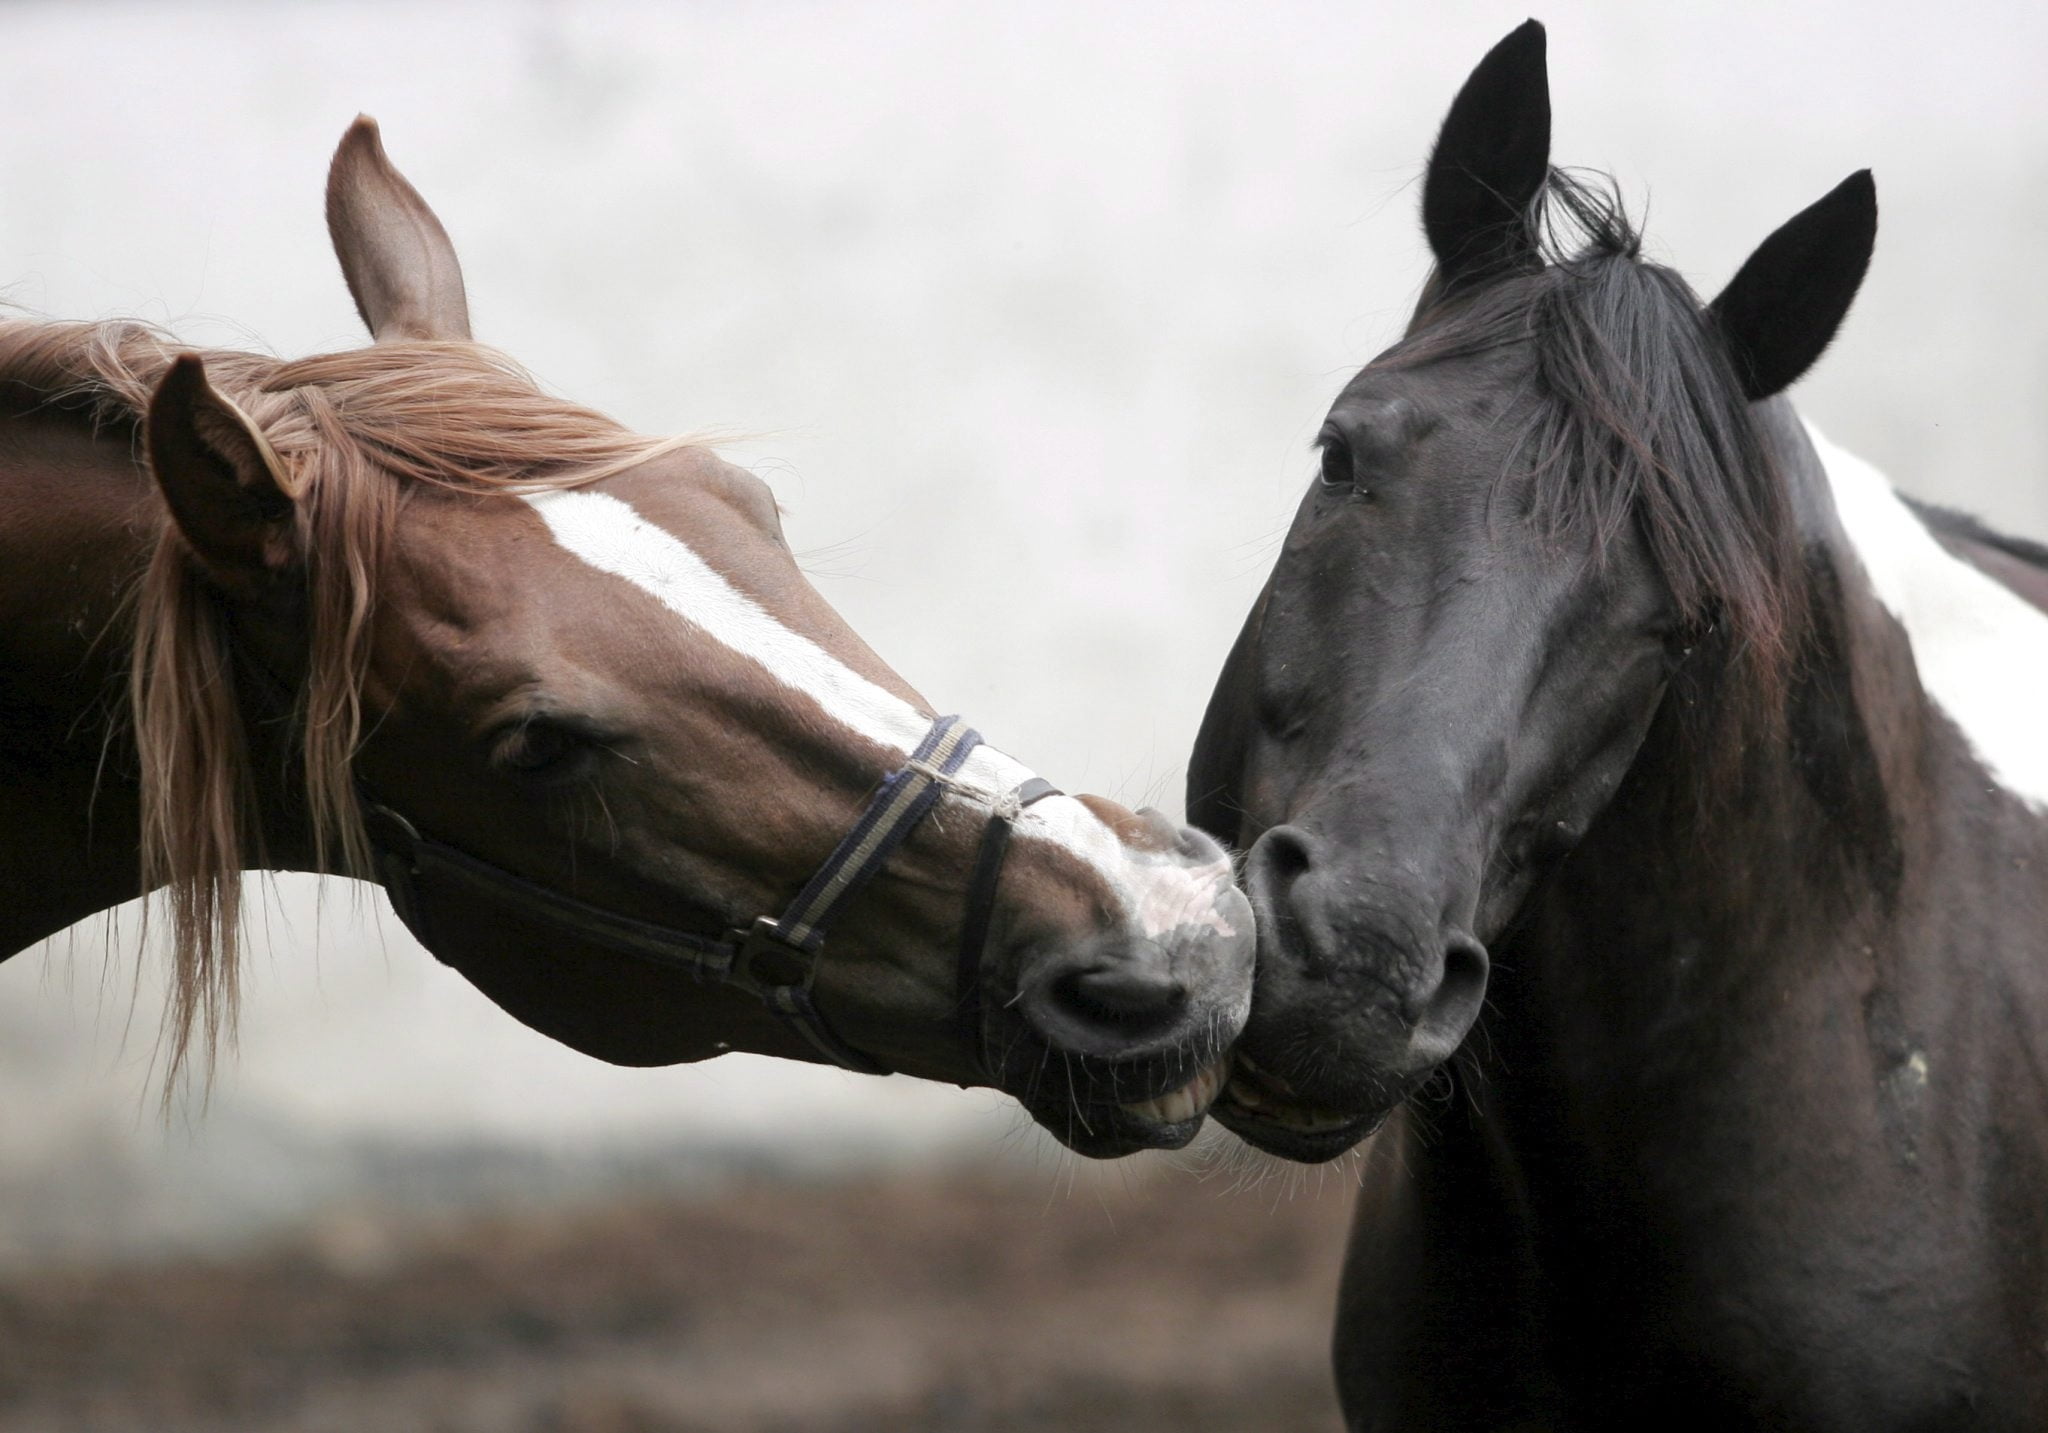 two black and brown horses, steam, care, affection, kissing, head